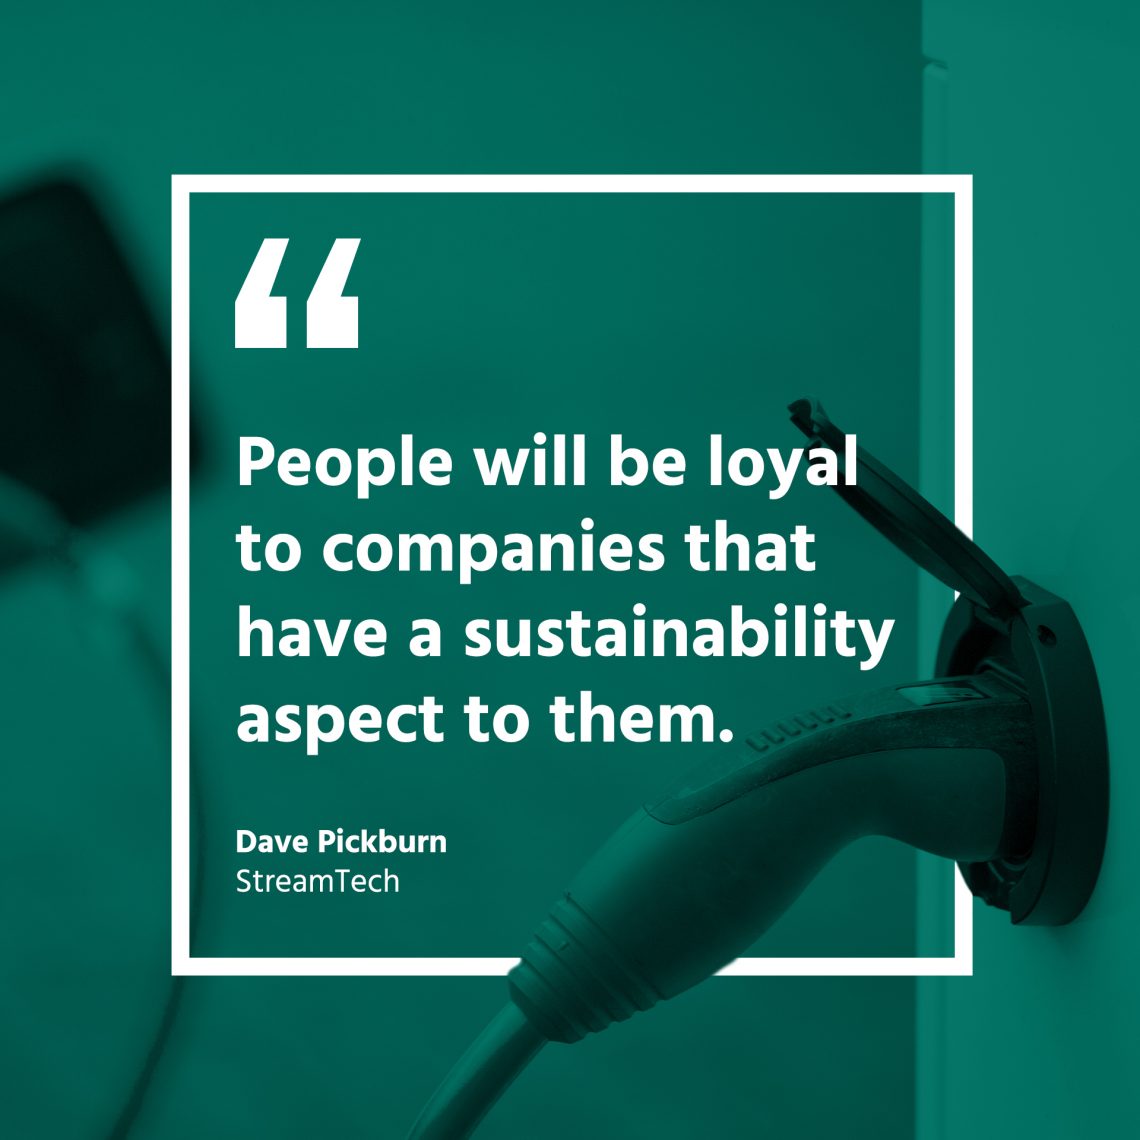 People will be loyal to companies that have a sustainability aspect to them